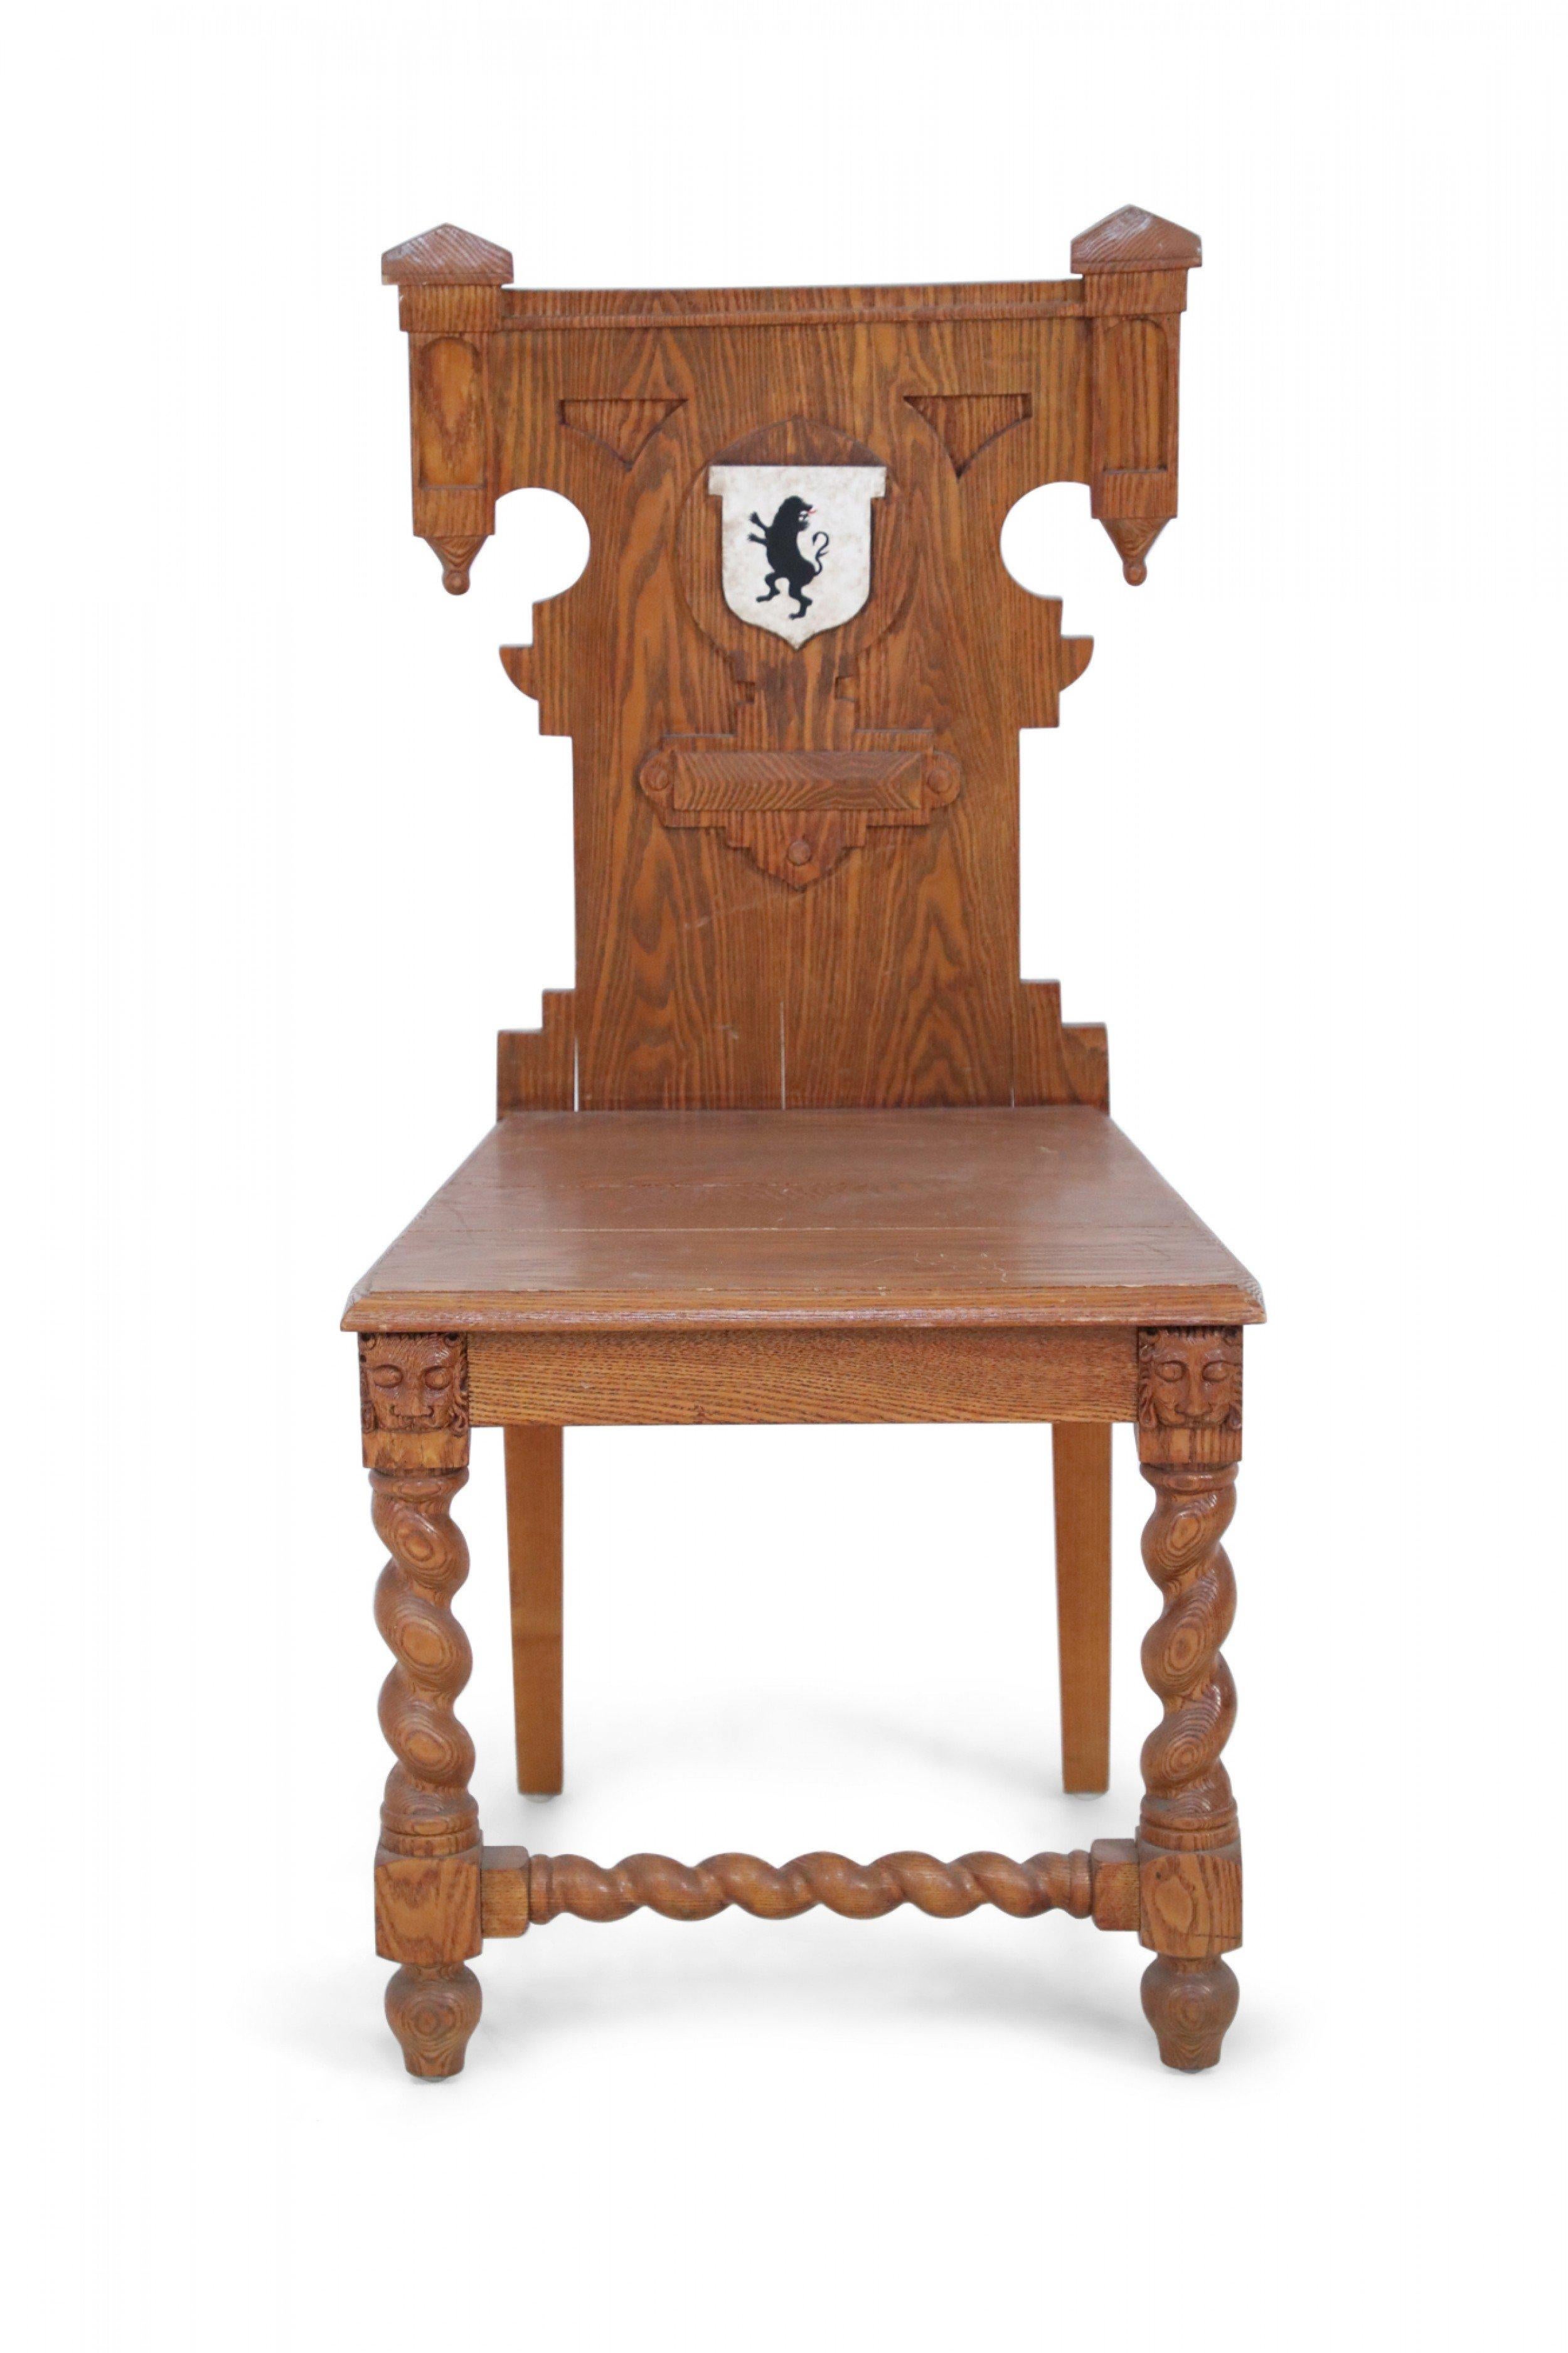 Italian Renaissance Carved Wooden Turn-Legged Side Chair For Sale 3